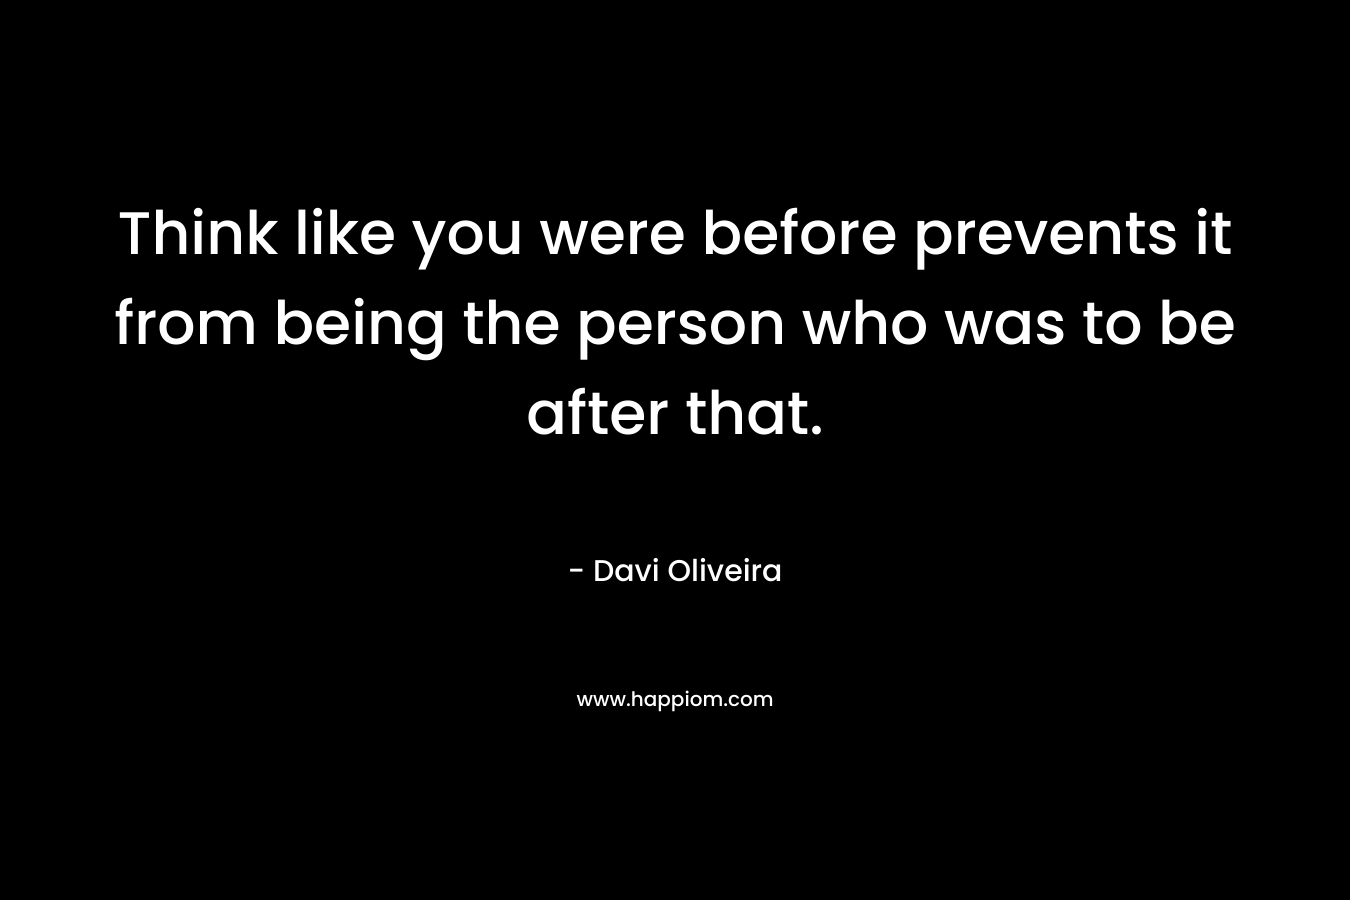 Think like you were before prevents it from being the person who was to be after that.